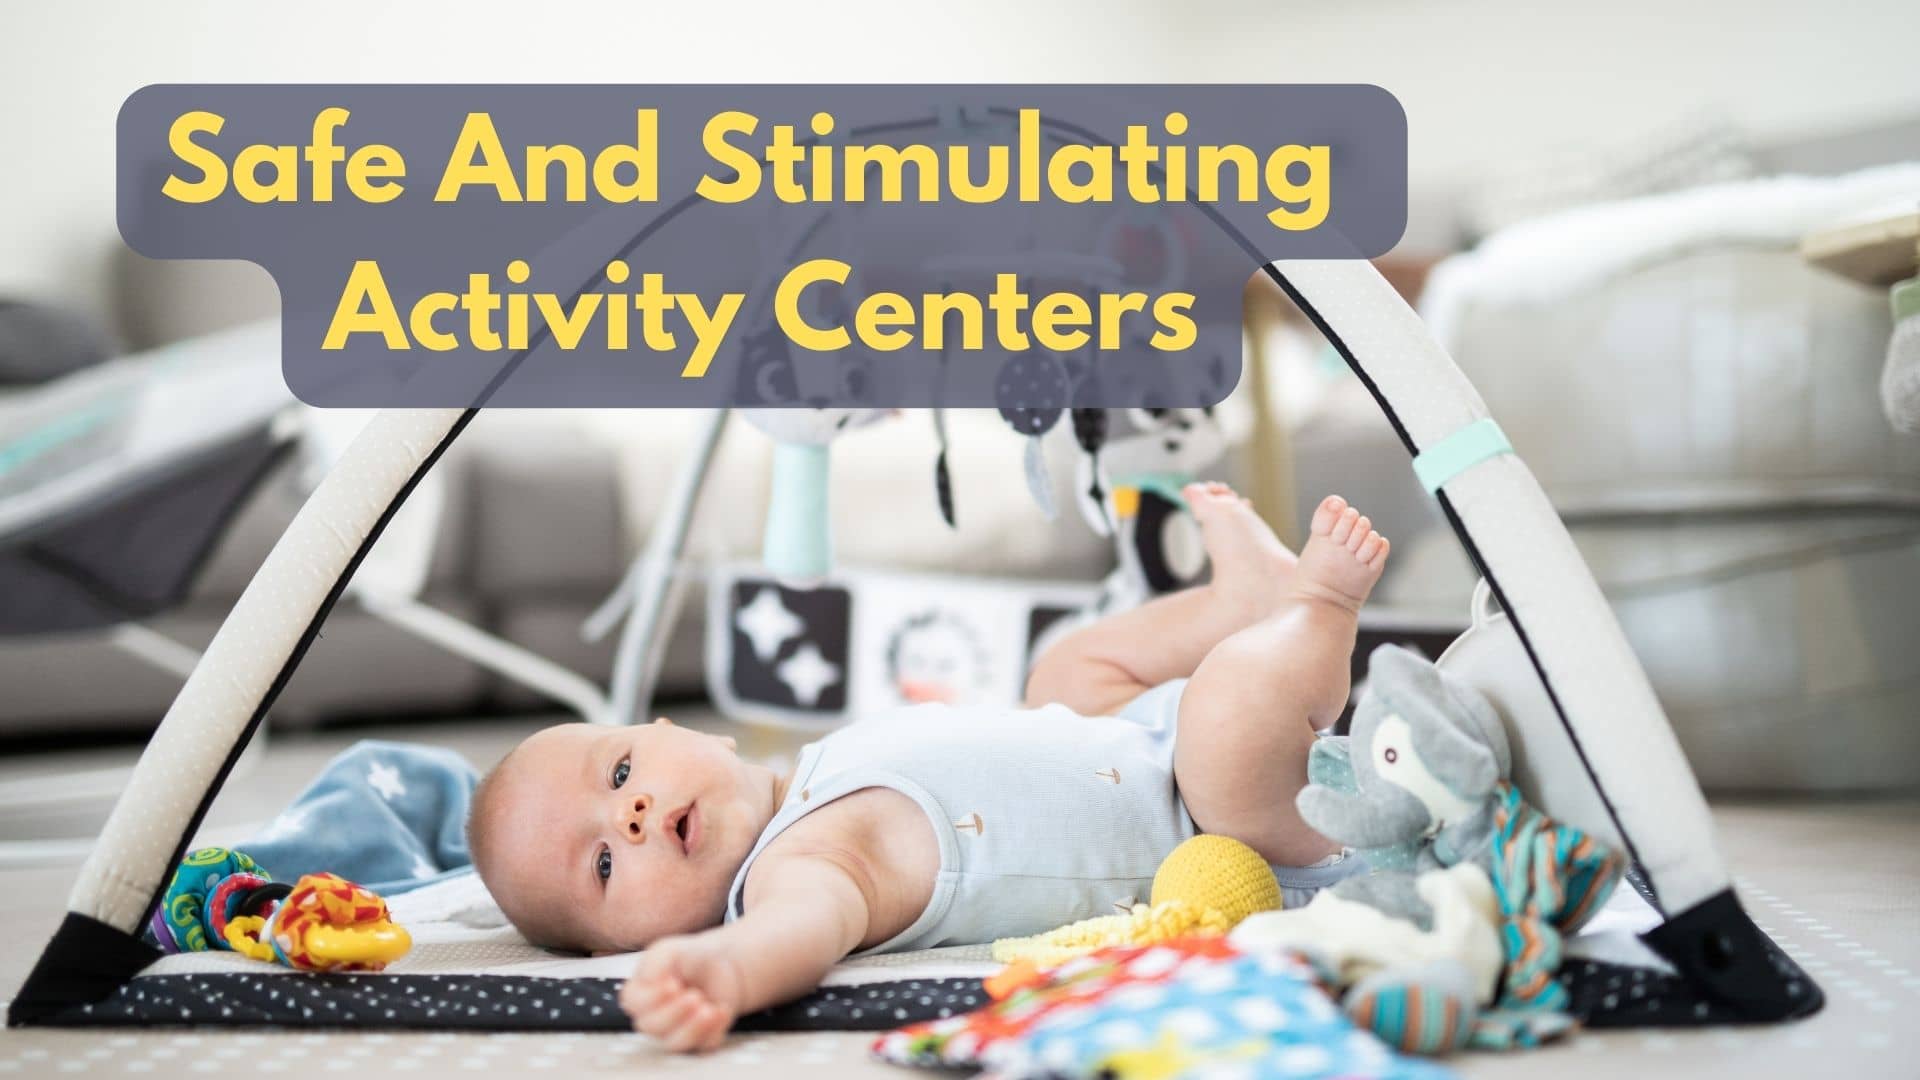 How To Select Safe And Stimulating Activity Centers?